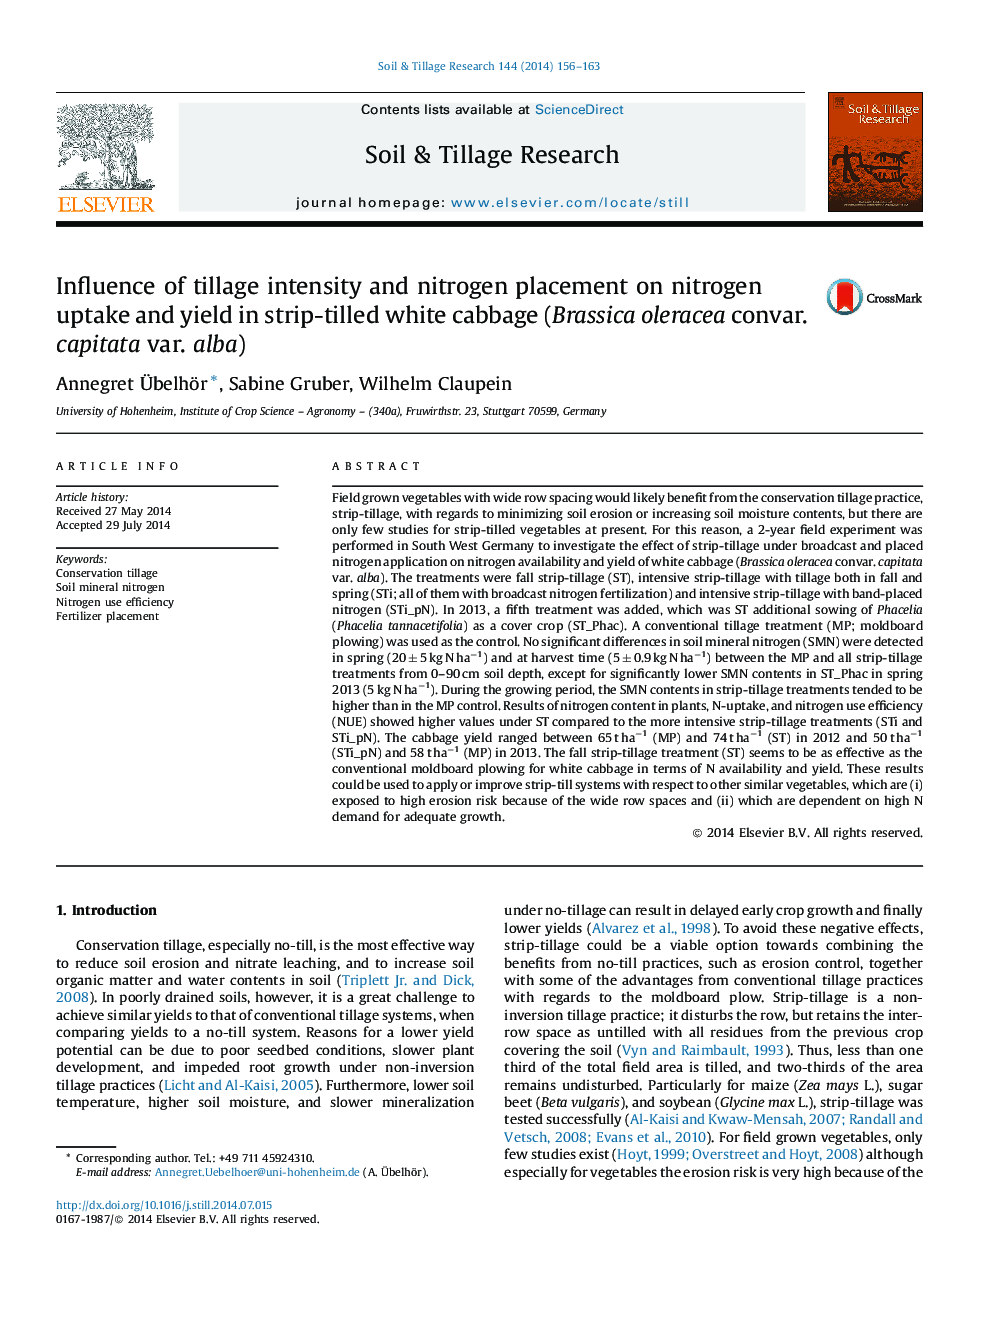 Influence of tillage intensity and nitrogen placement on nitrogen uptake and yield in strip-tilled white cabbage (Brassica oleracea convar. capitata var. alba)